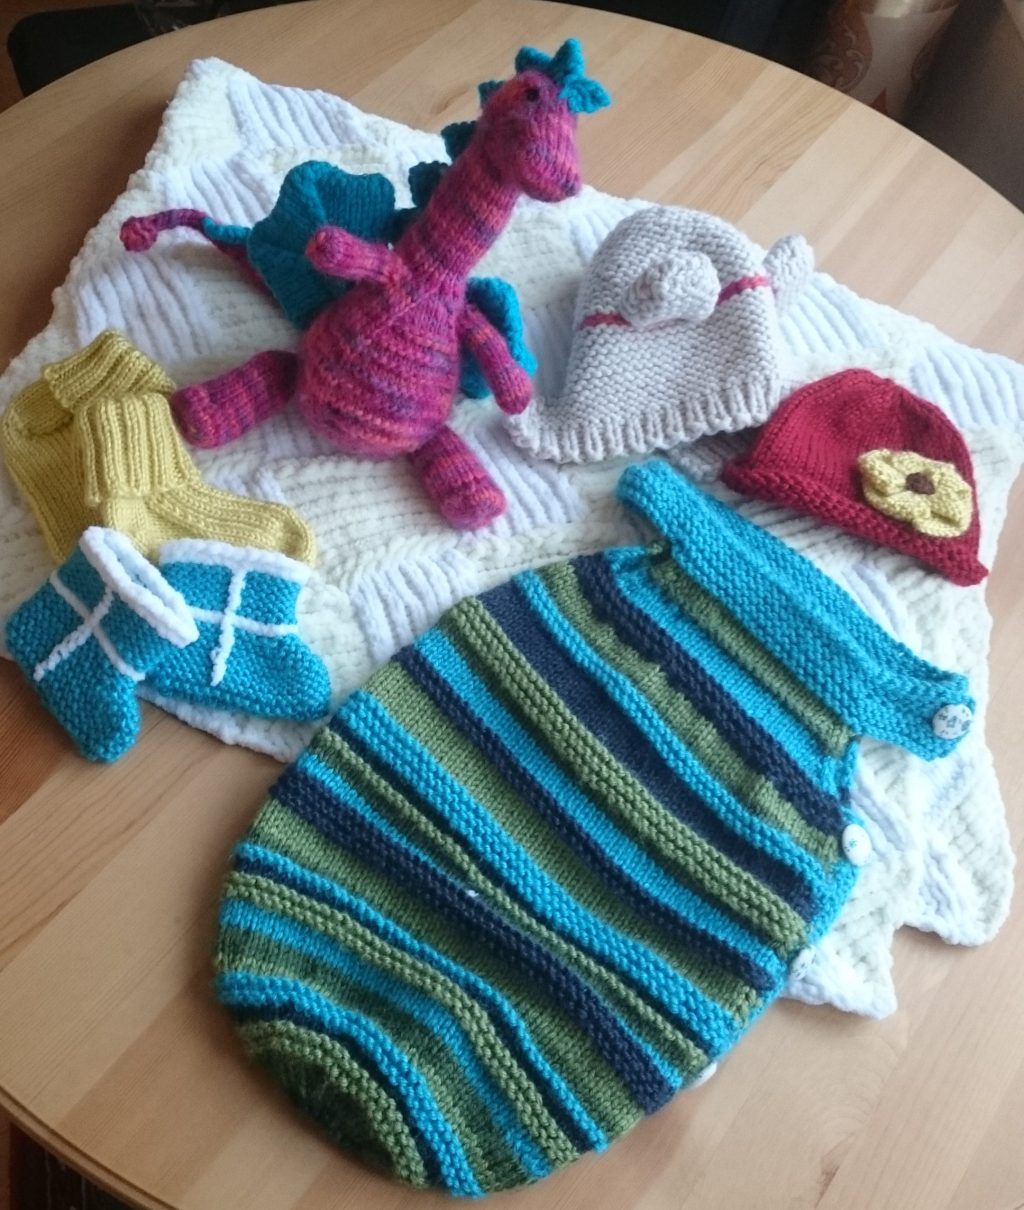 Some prepare for their little one by creating extravagant nurseries. I knit.